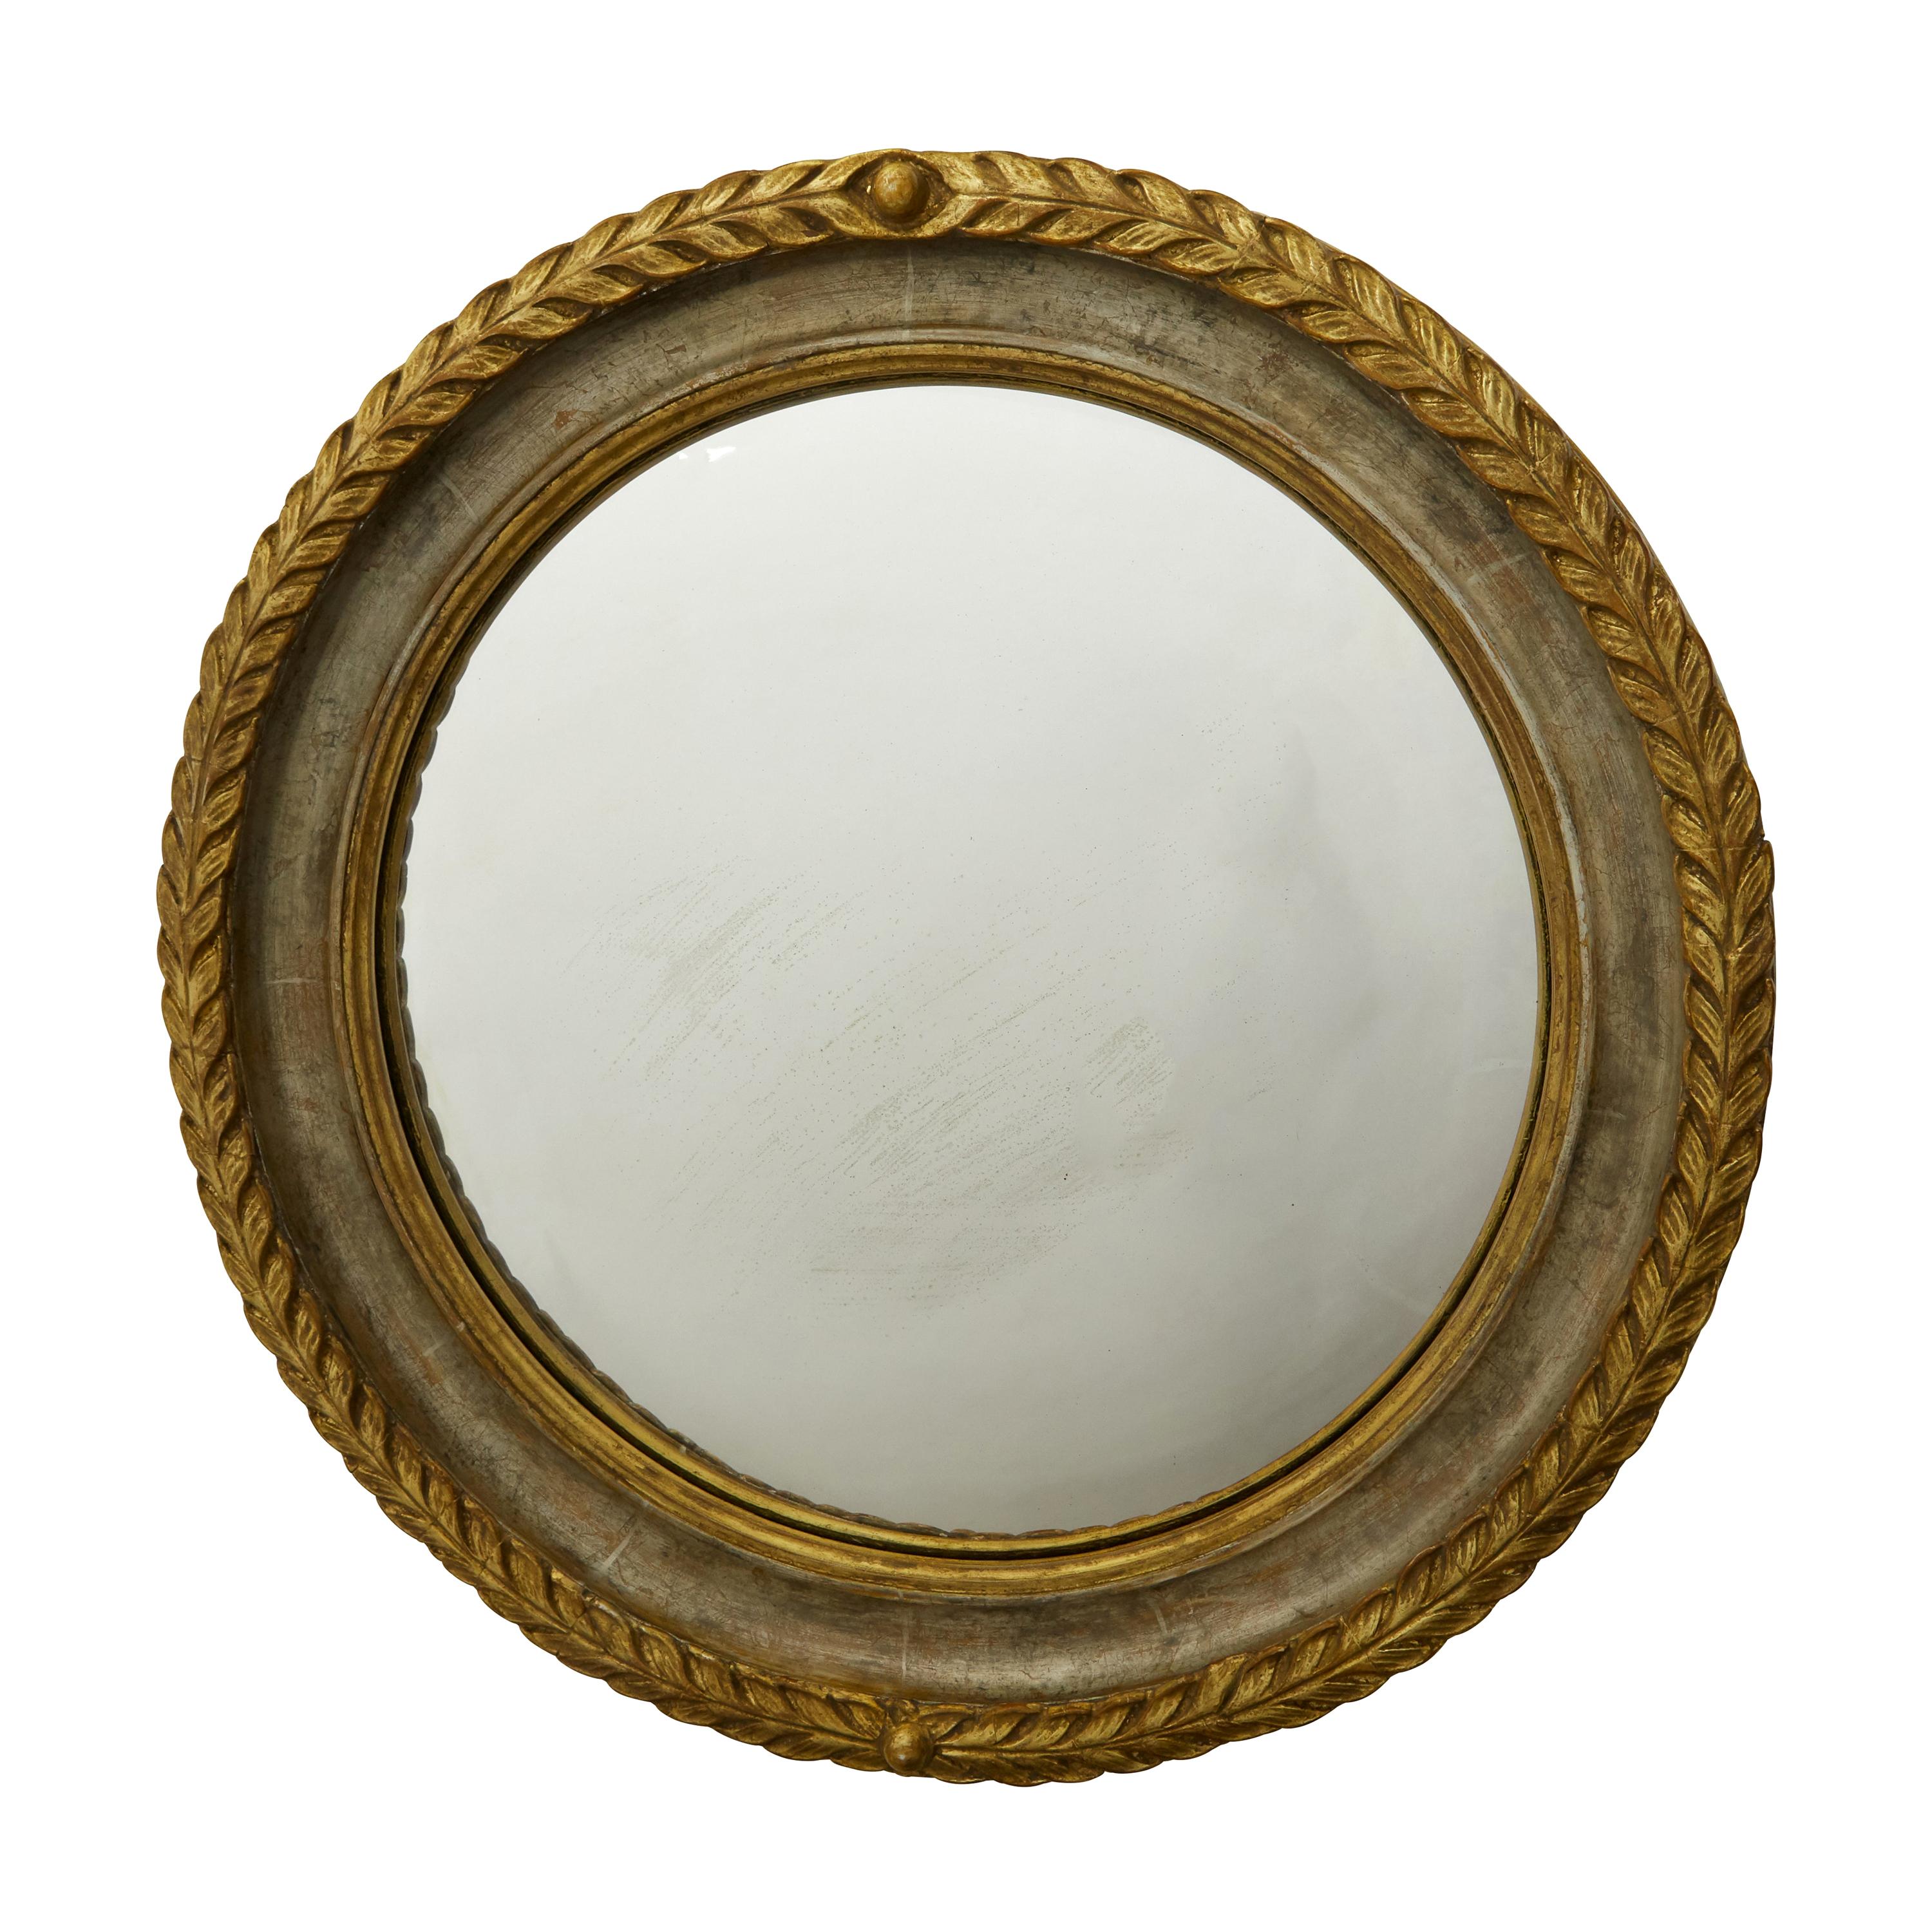 English 1920s-1930s Carved Wooden Round Mirror with Gilt Accents and Foliage